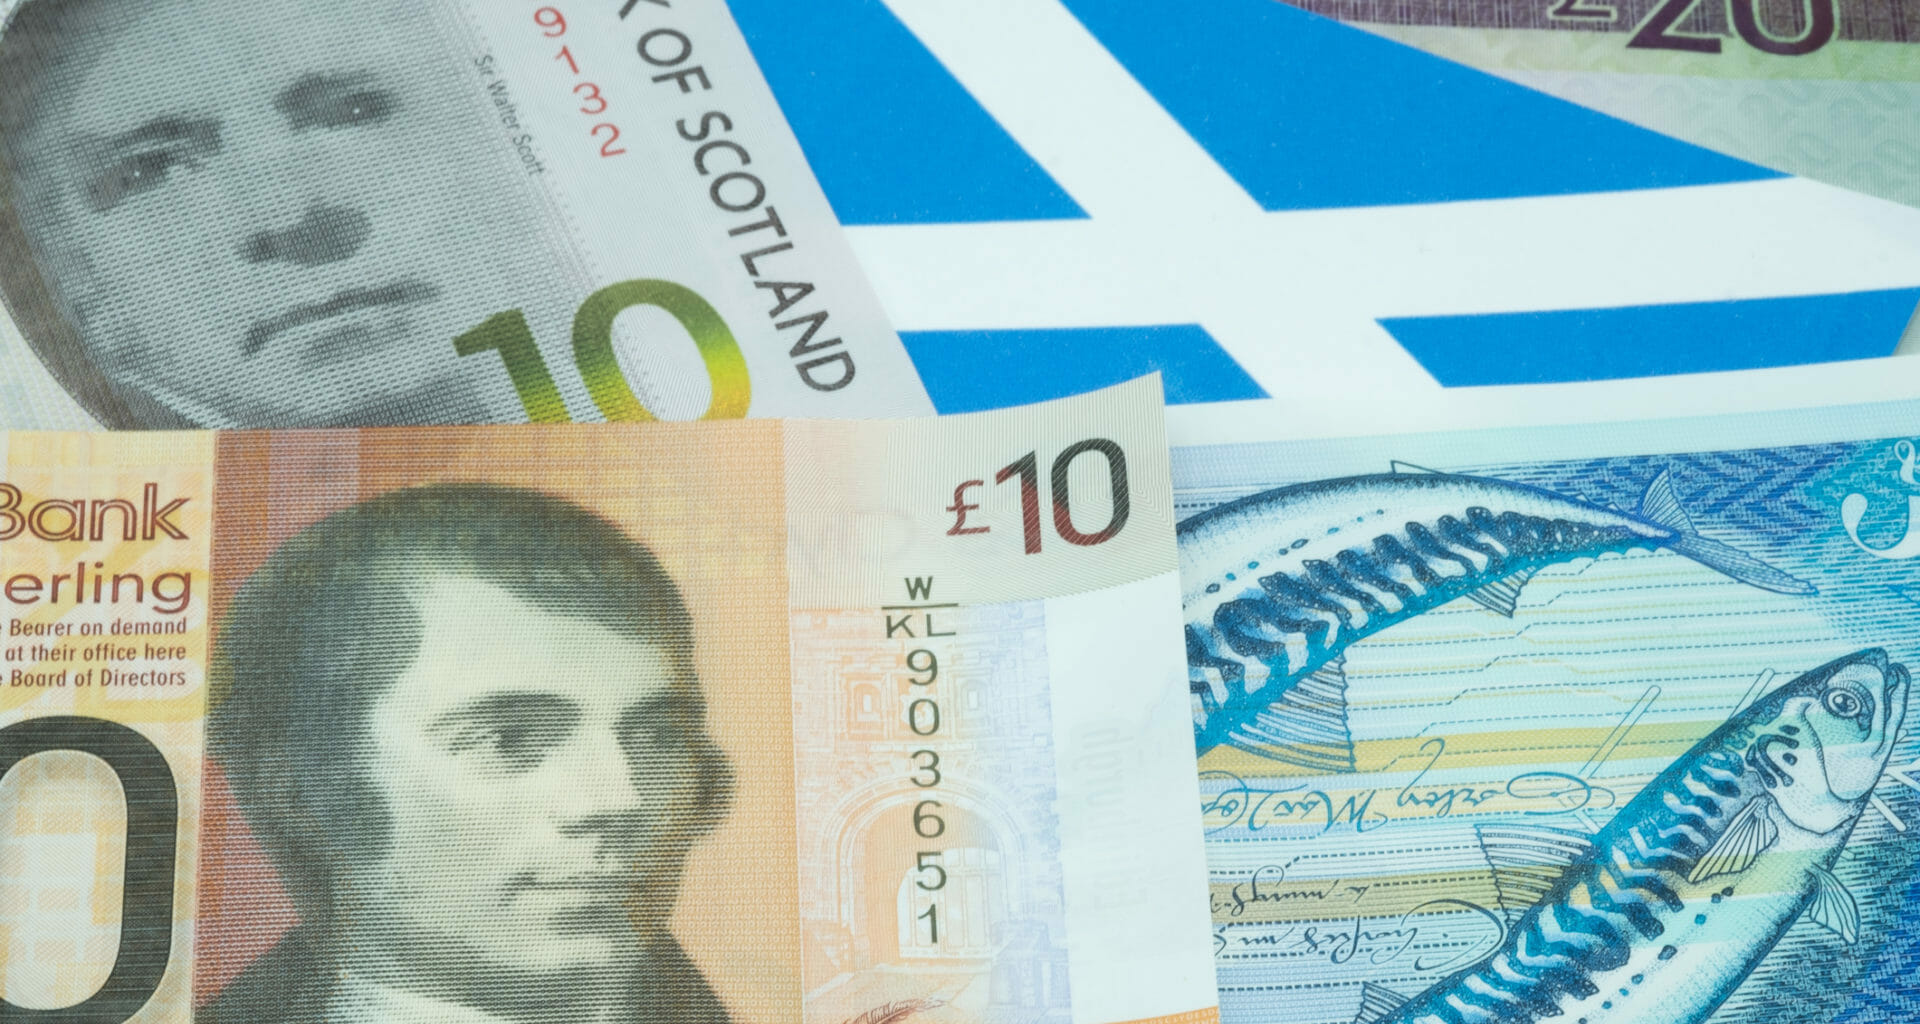 Claim Scottish Government underspent budget is Mostly True 7